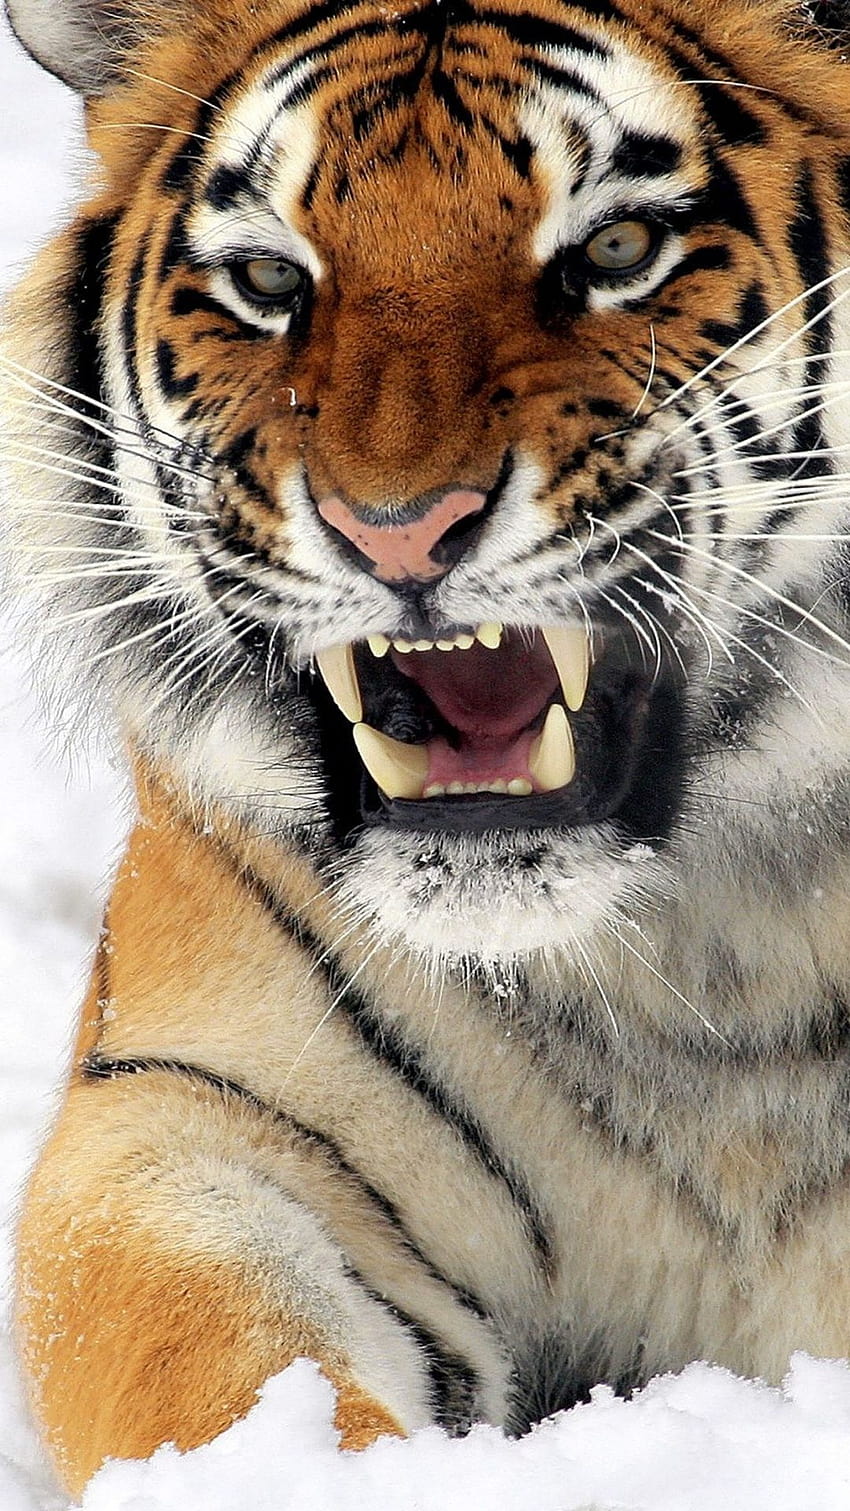 576877 1920x1280 widescreen hd tiger - Rare Gallery HD Wallpapers